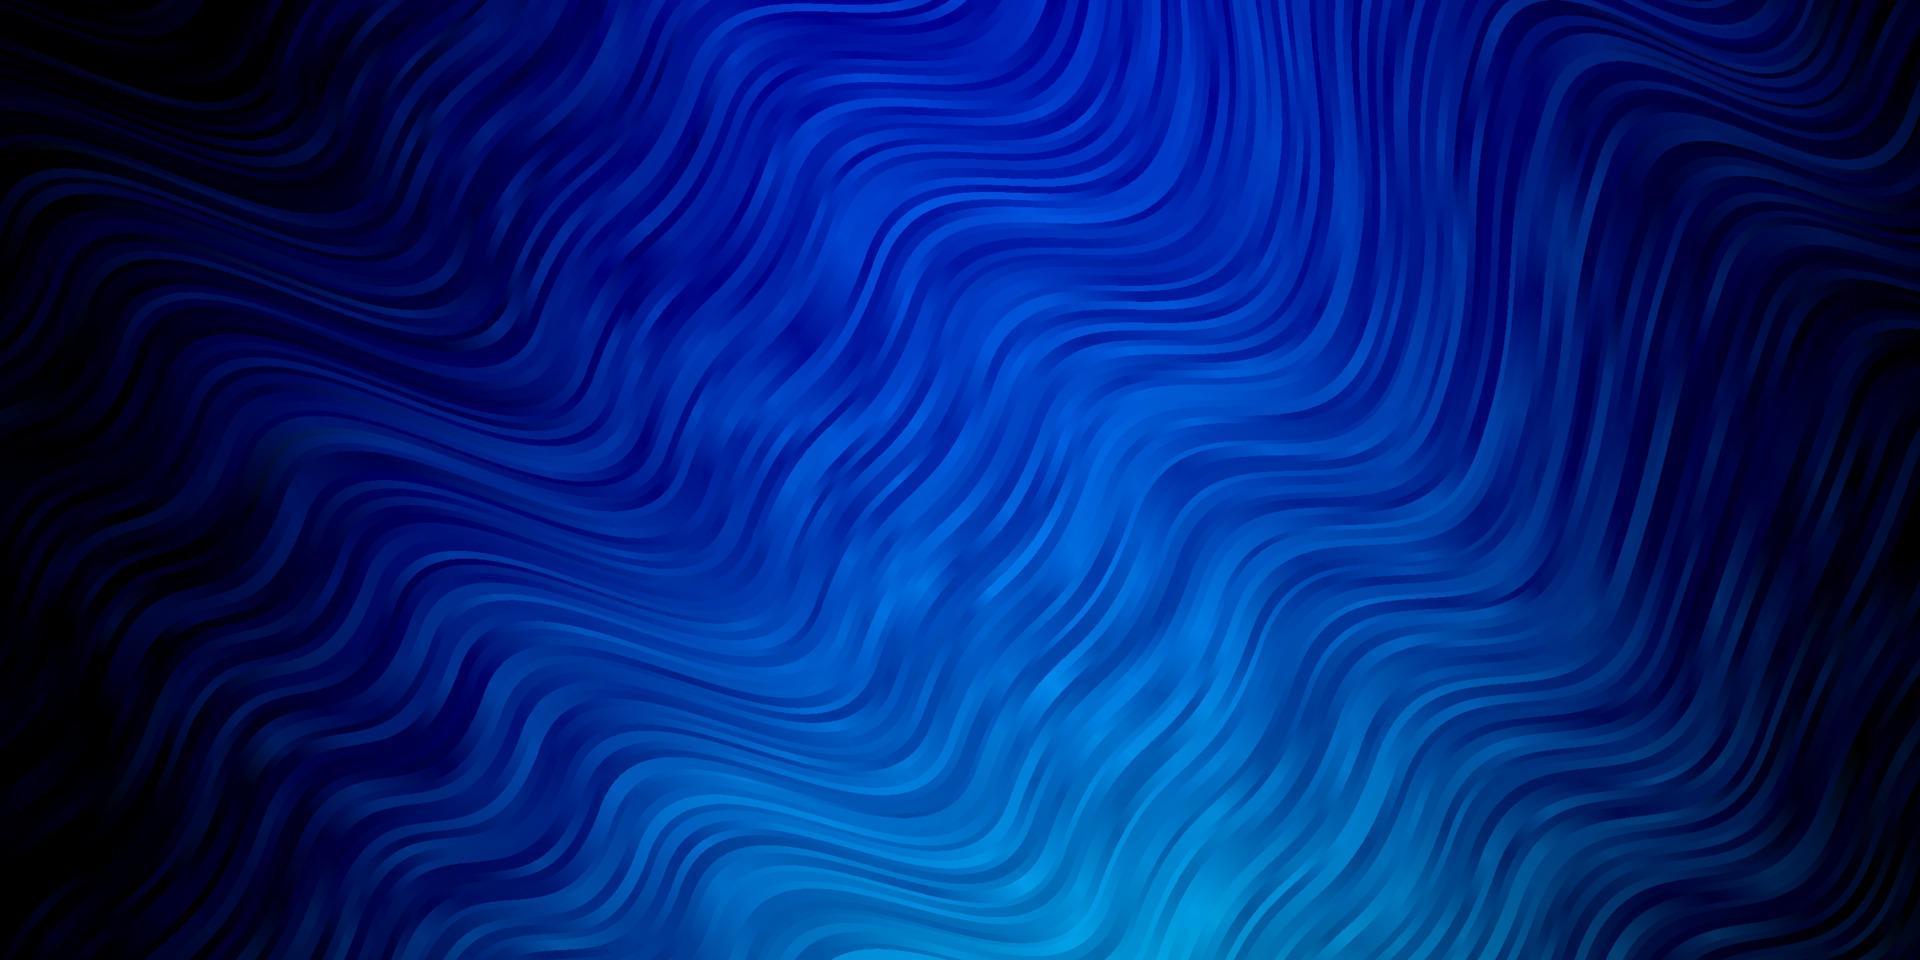 Dark BLUE vector layout with curves.